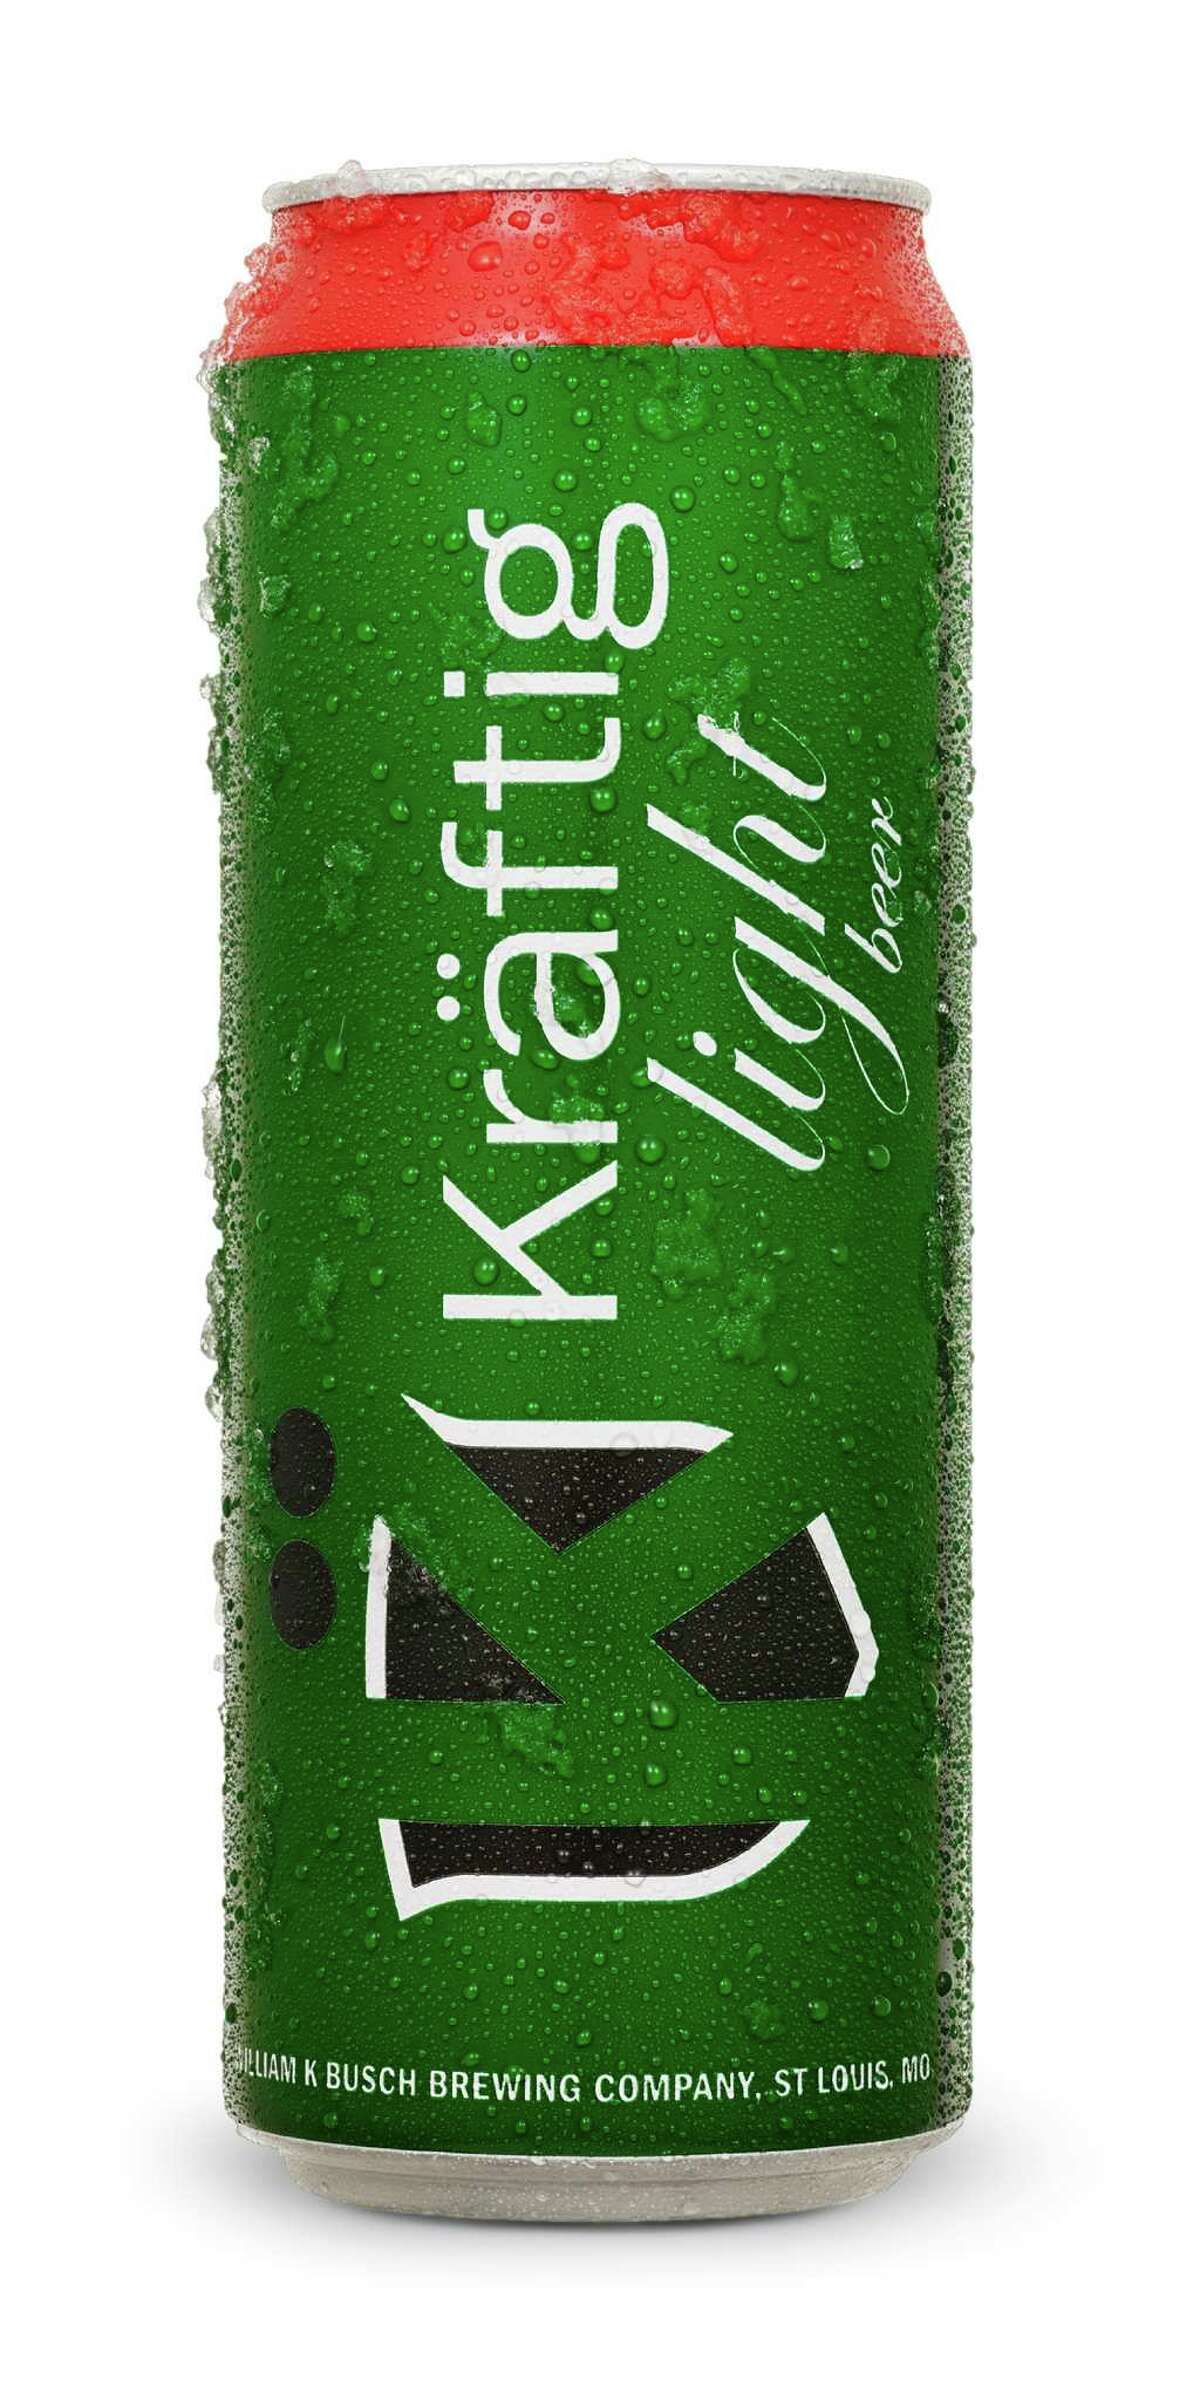 The William K Busch Brewing Co., which begins sales in Houston and southern Texas on May 12, 2015, makes Kräftig and Kräftig Light.